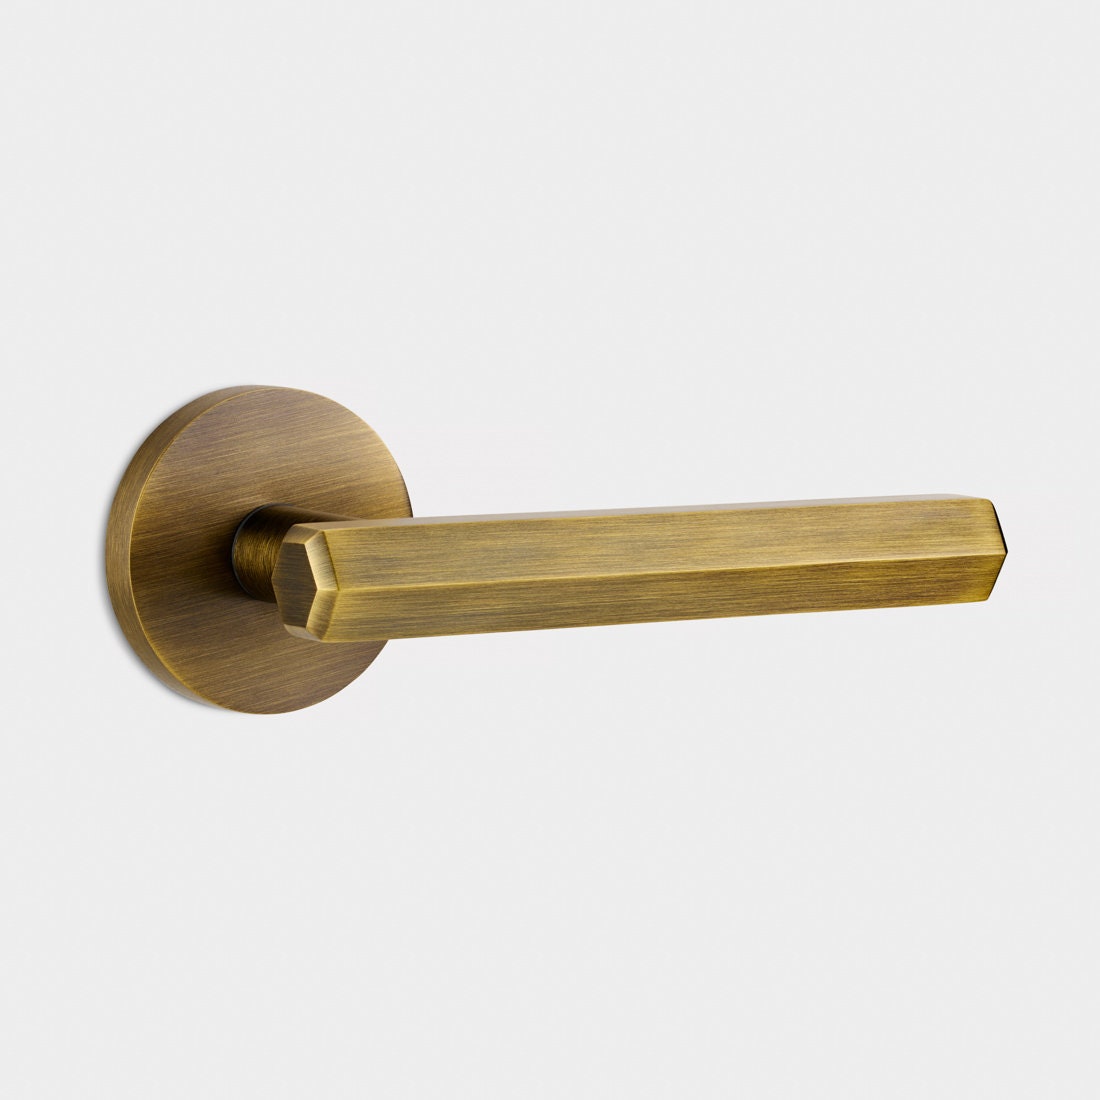 Solid Brass Gold, Silver and Matte Black Hexagonal Internal Door Lever  Handles. Protective Lacquer to Prevent Tarnishing. Strong Loaded. 